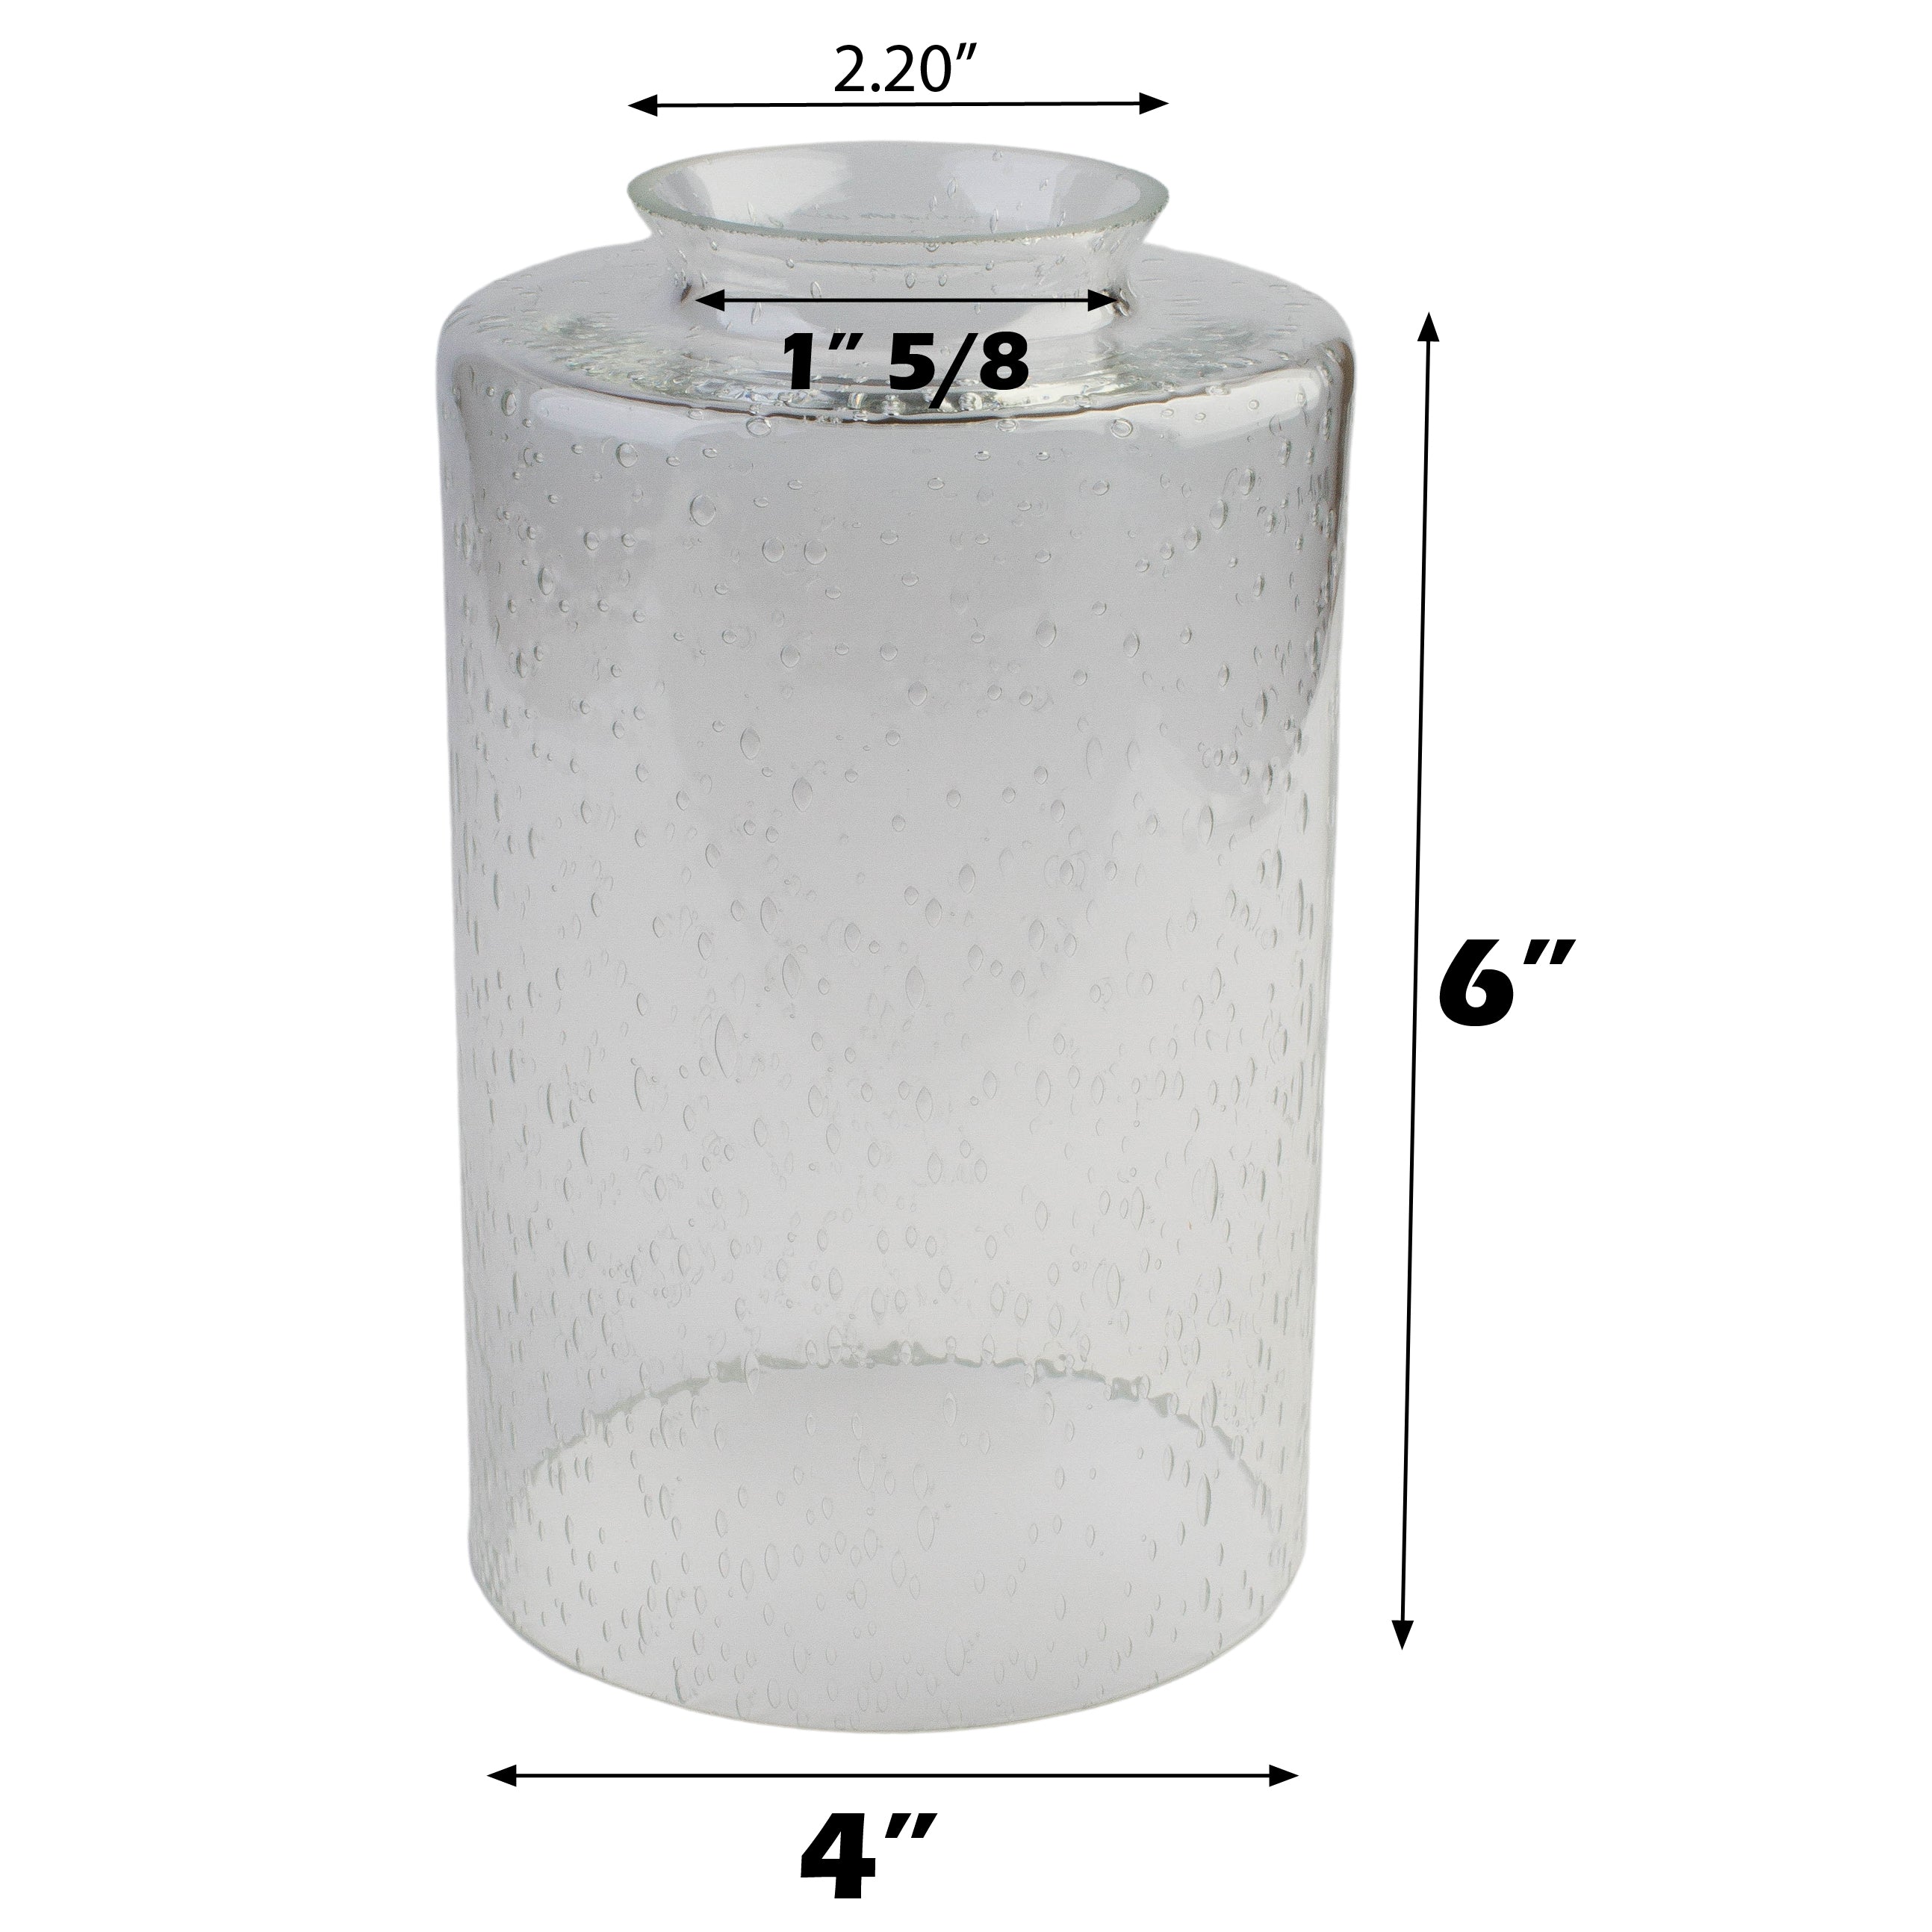 3 Pack clear bubble seeded glass shade cylinder screw fixed for ceiling fan & light fixture